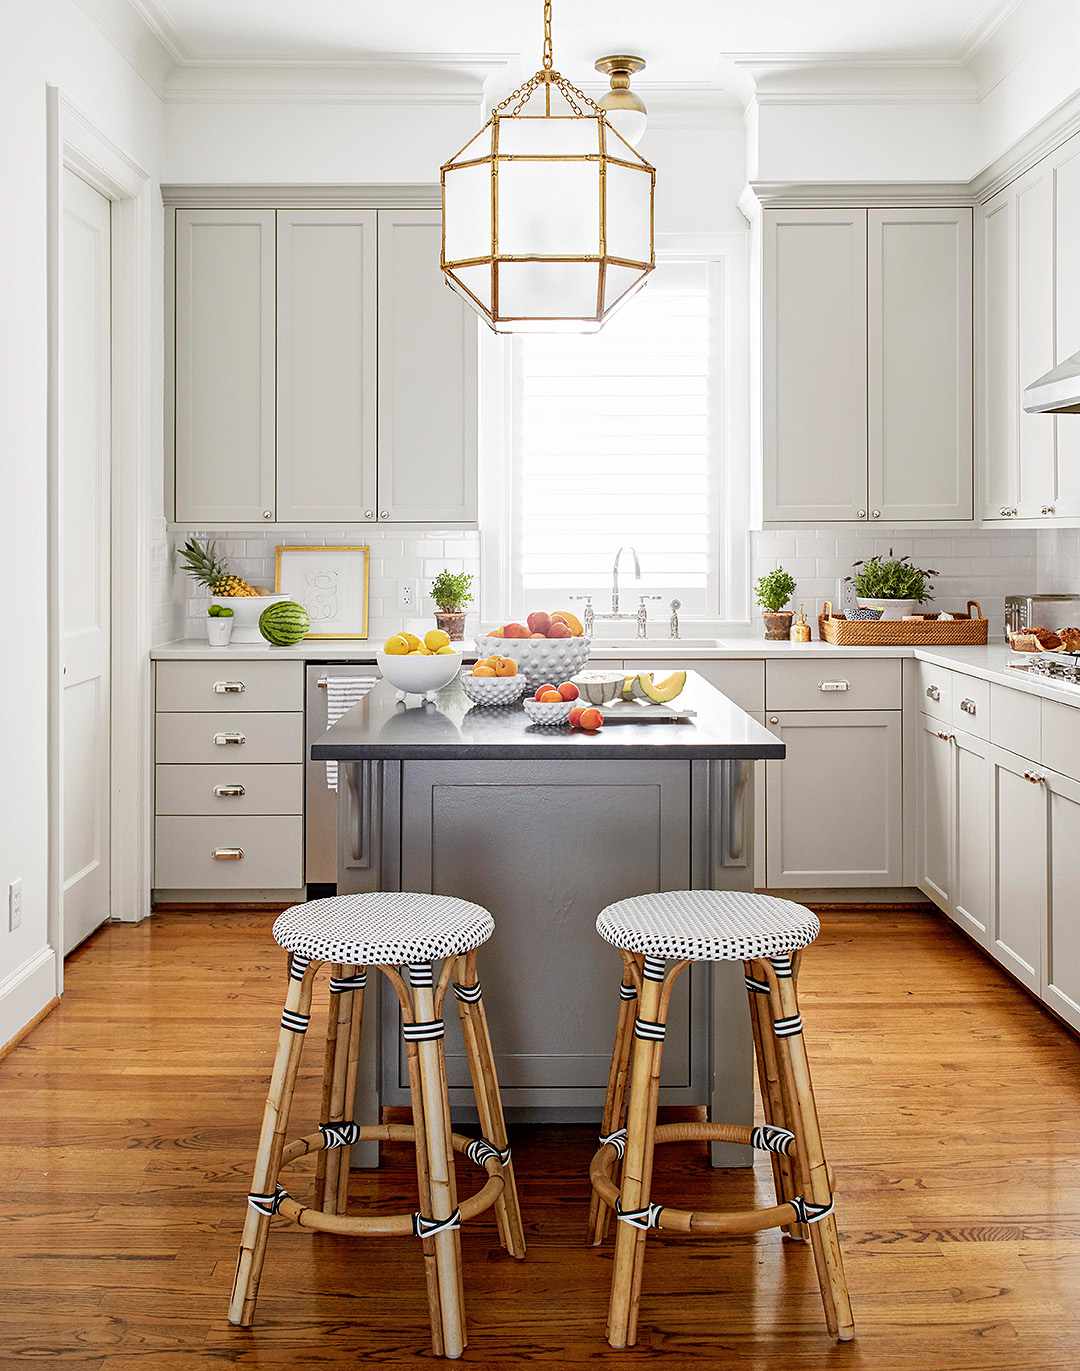 18 Small Kitchen Island Ideas That Maximize Storage and Prep Space ...